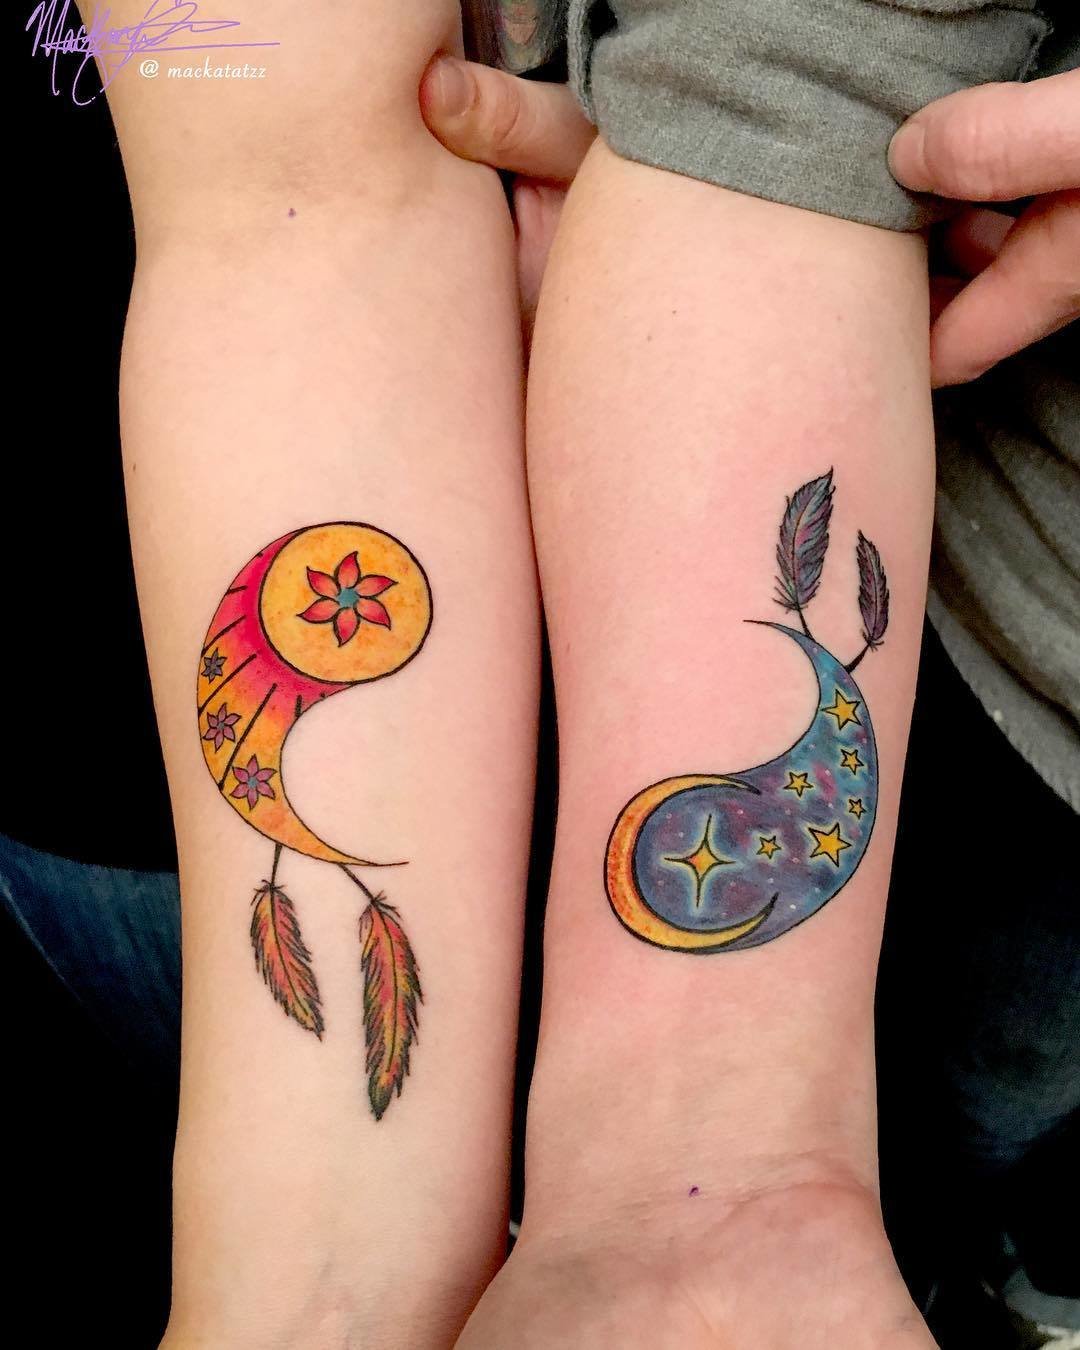 50 cool anime tattoos for yourself and for couples matching tat   Brieflycoza